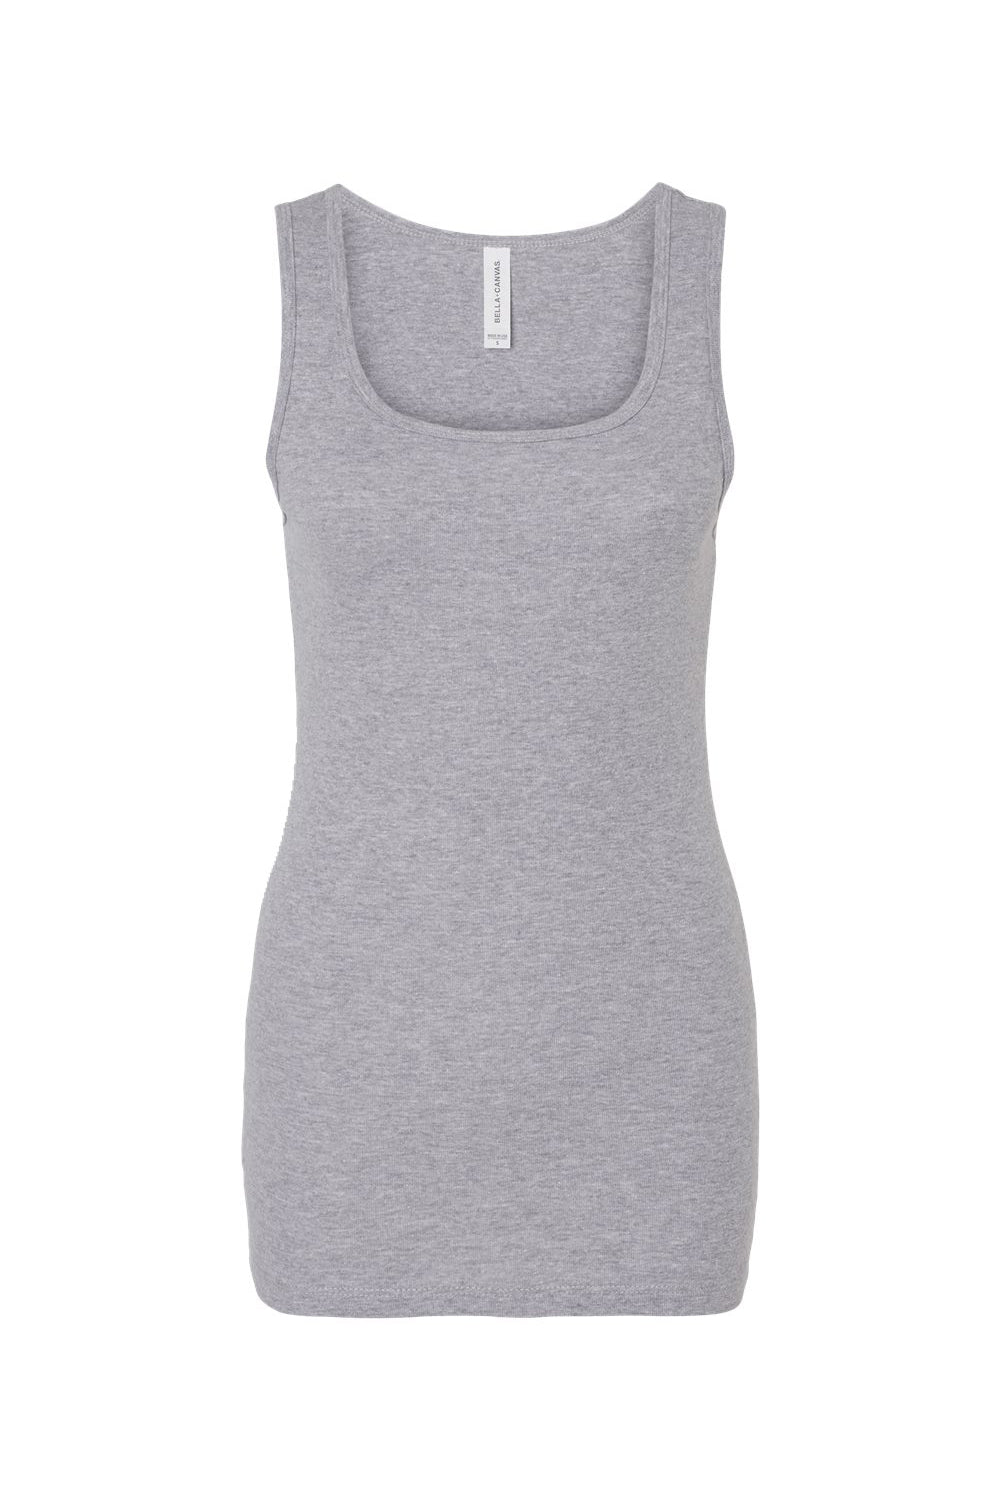 Bella + Canvas 1081 Womens Micro Ribbed Tank Top Heather Grey Flat Front